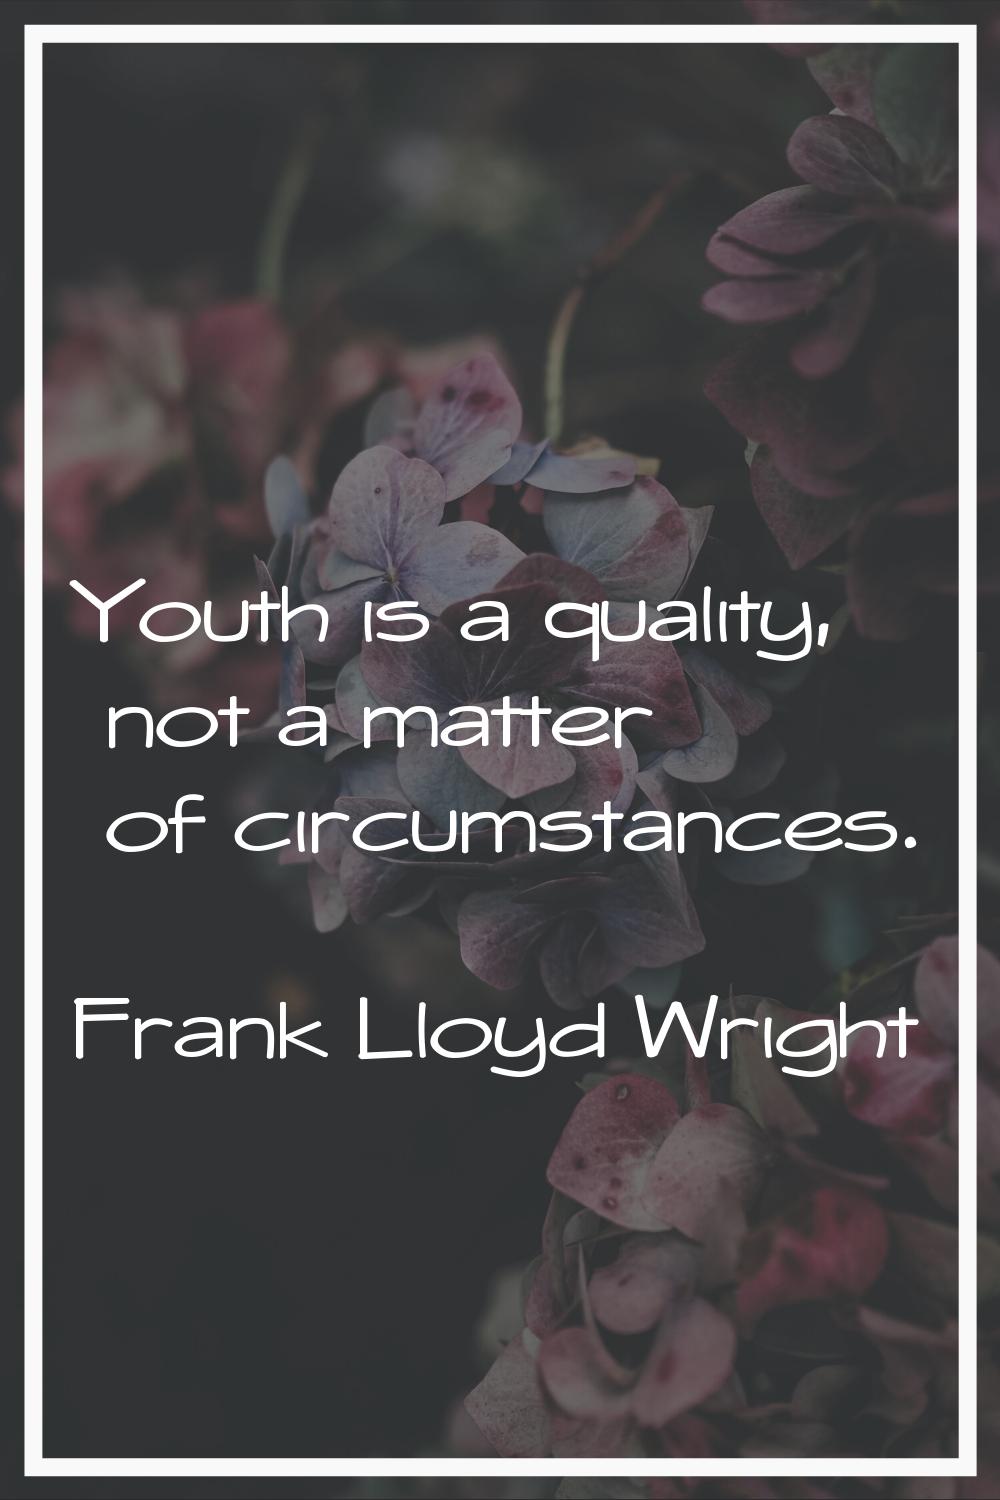 Youth is a quality, not a matter of circumstances.